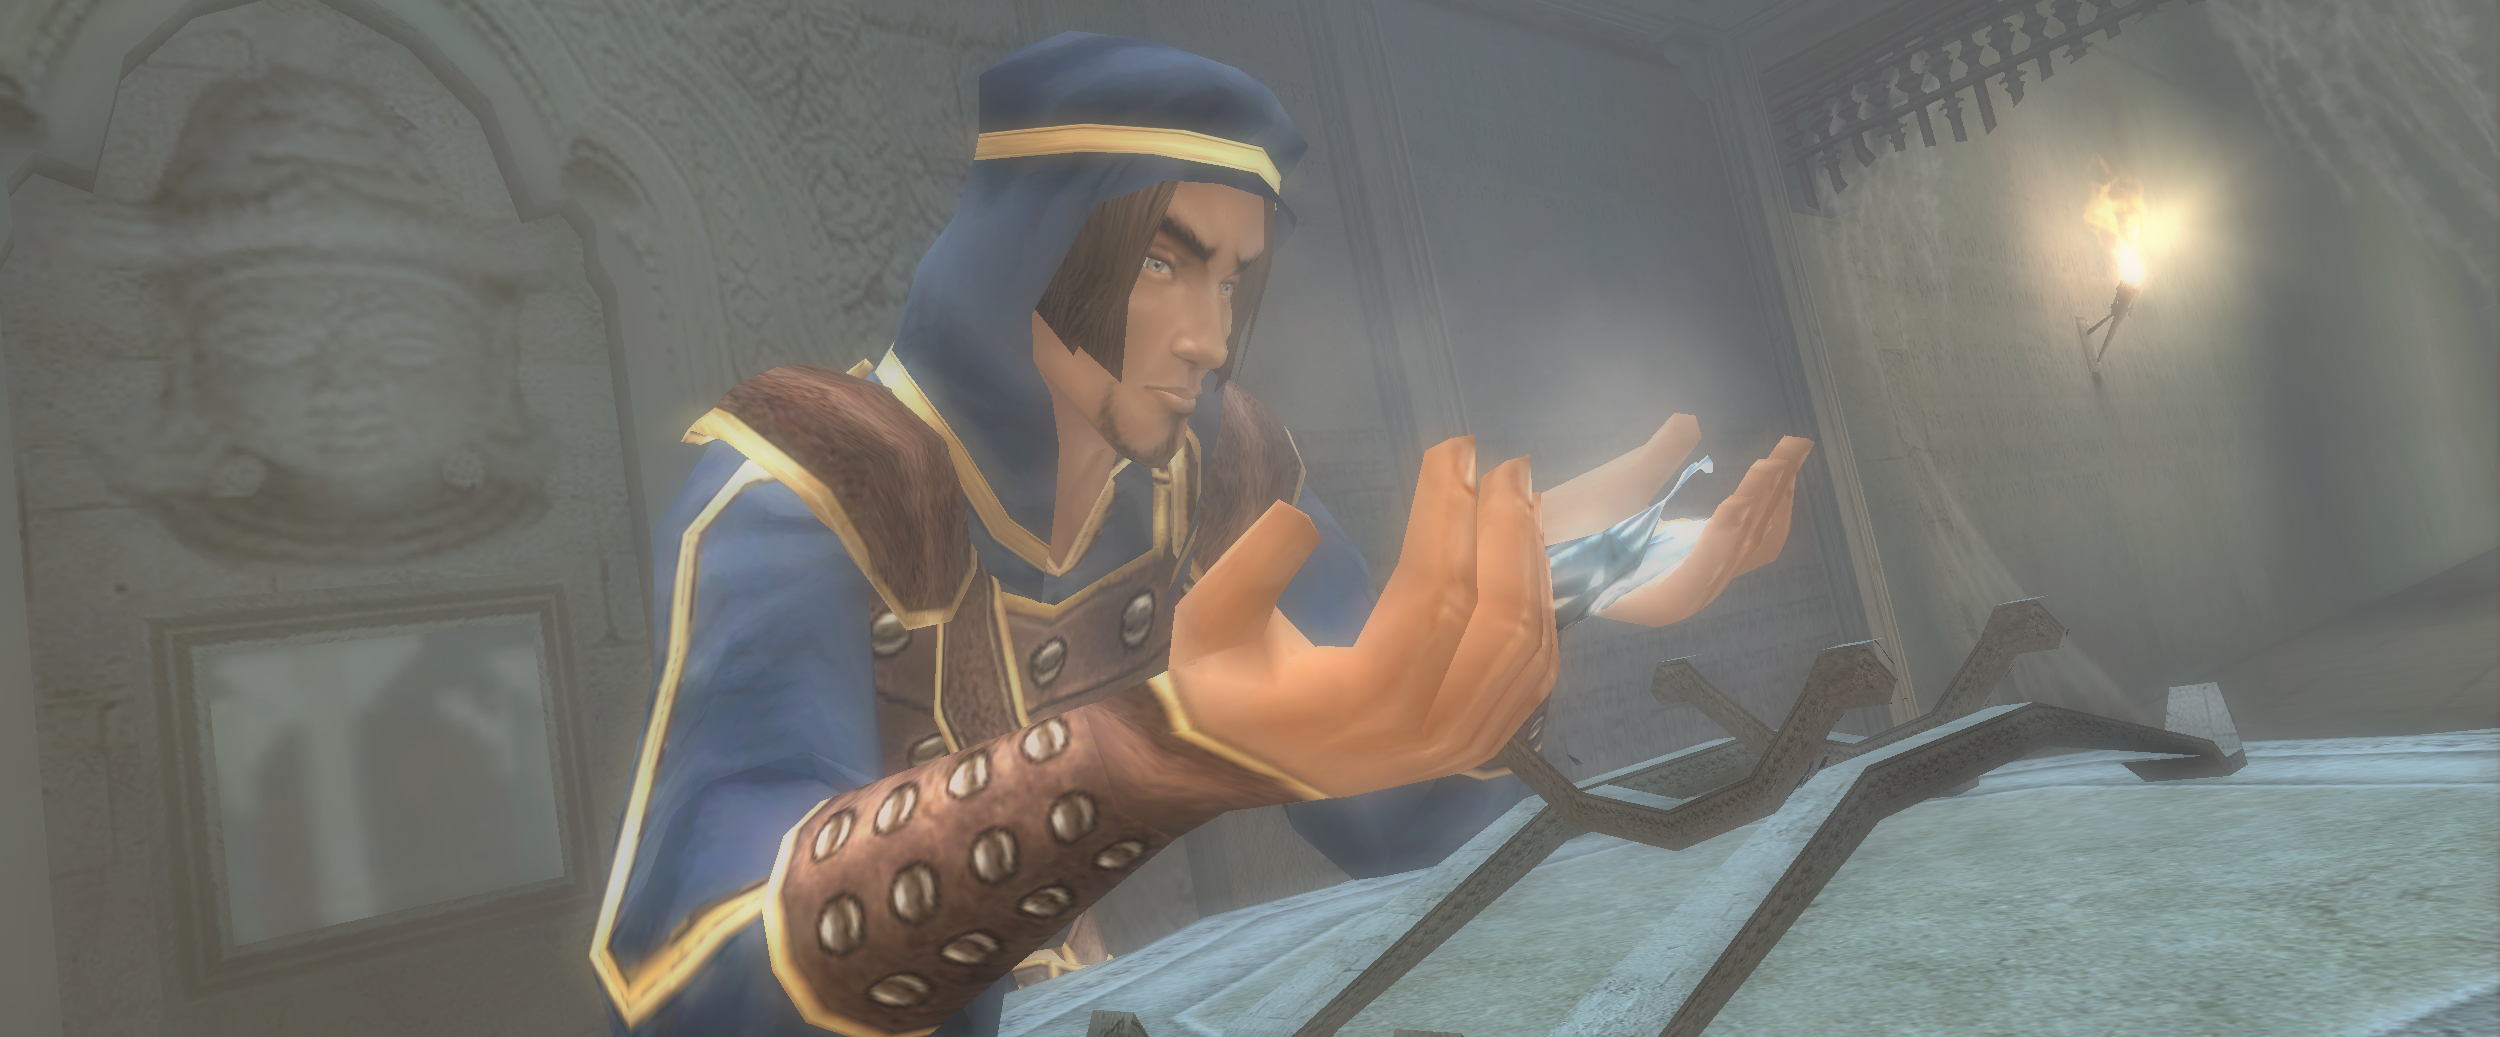 prince of persia sand of time trainer